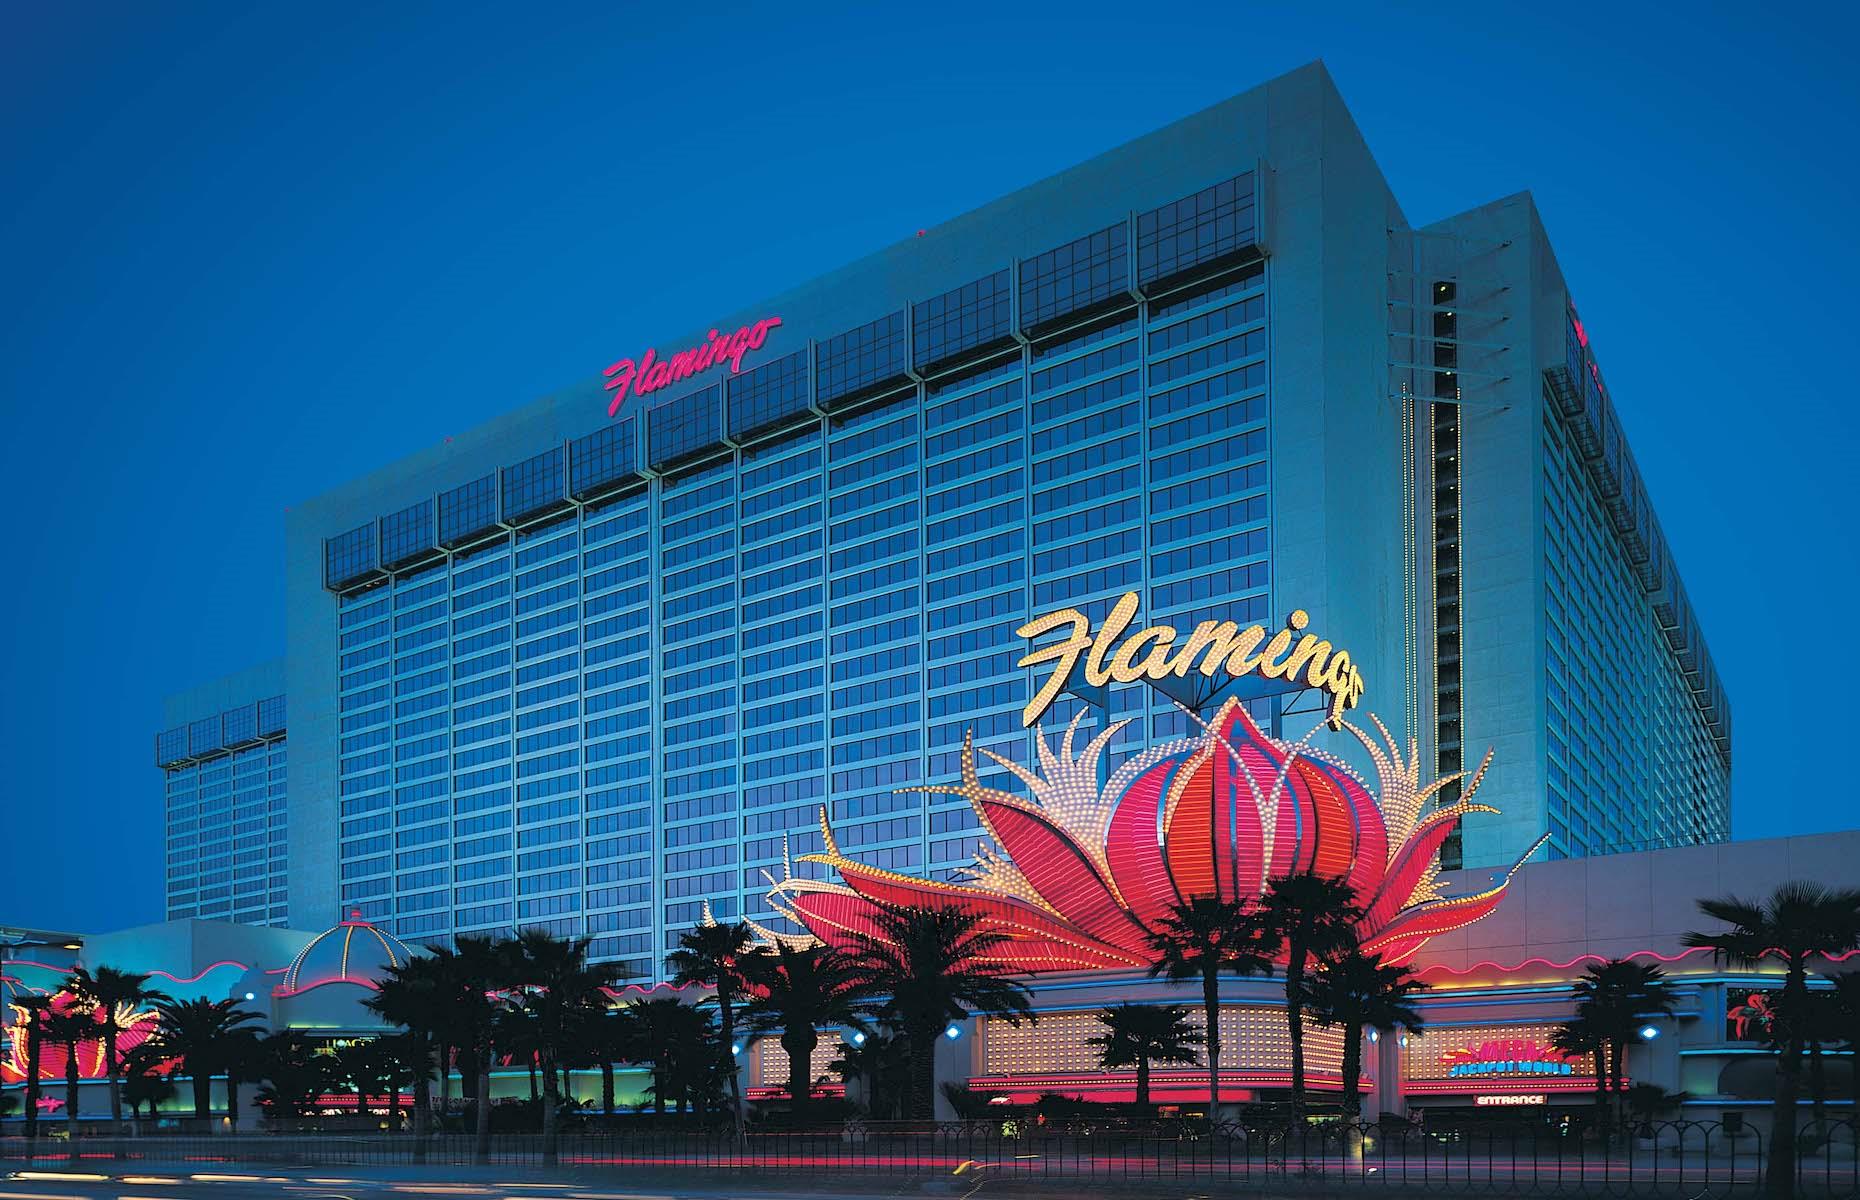 <p>The iconic 3,545-room Flamingo commands the sky on the corner of Las Vegas Boulevard and Flamingo Road and is the oldest resort still operating on the Strip. The hotel first opened in 1946 with just 105 rooms and was ran by mobster Bugsby Siegel until his assassination just six months later. The hotel has changed ownership and grown beyond recognition over the decades – it now has an array of dining options, entertainment, a wildlife habitat and a 15-acre Caribbean-style water playground.</p>  <p><a href="https://www.loveexploring.com/galleries/99342/sin-city-secrets-the-incredible-story-of-las-vegas?page=1"><strong>Read more about the history of Sin City</strong></a></p>